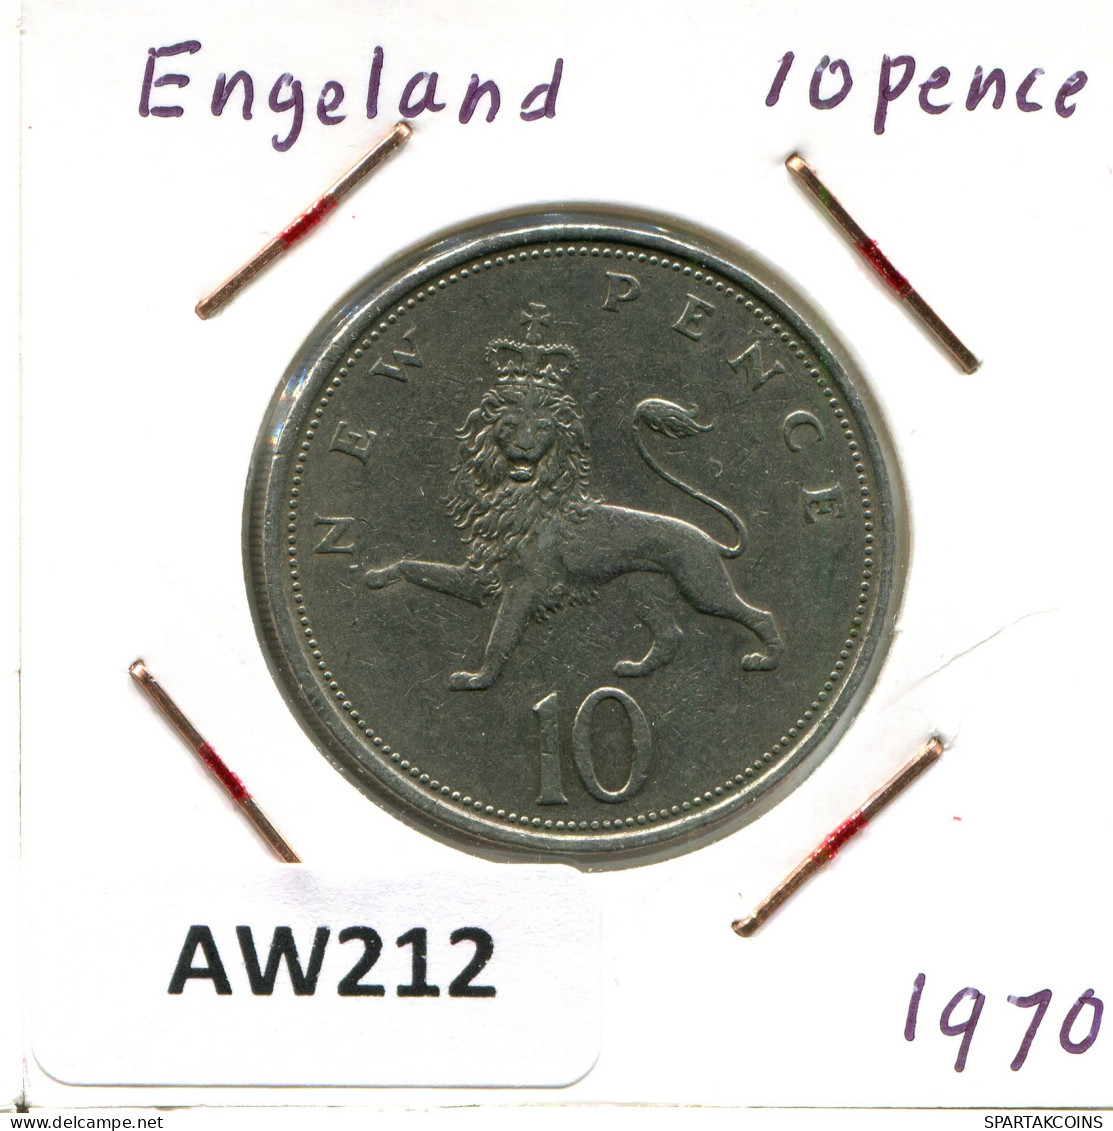 10 PENCE 1970 UK GREAT BRITAIN Coin #AW212.U - 10 Pence & 10 New Pence